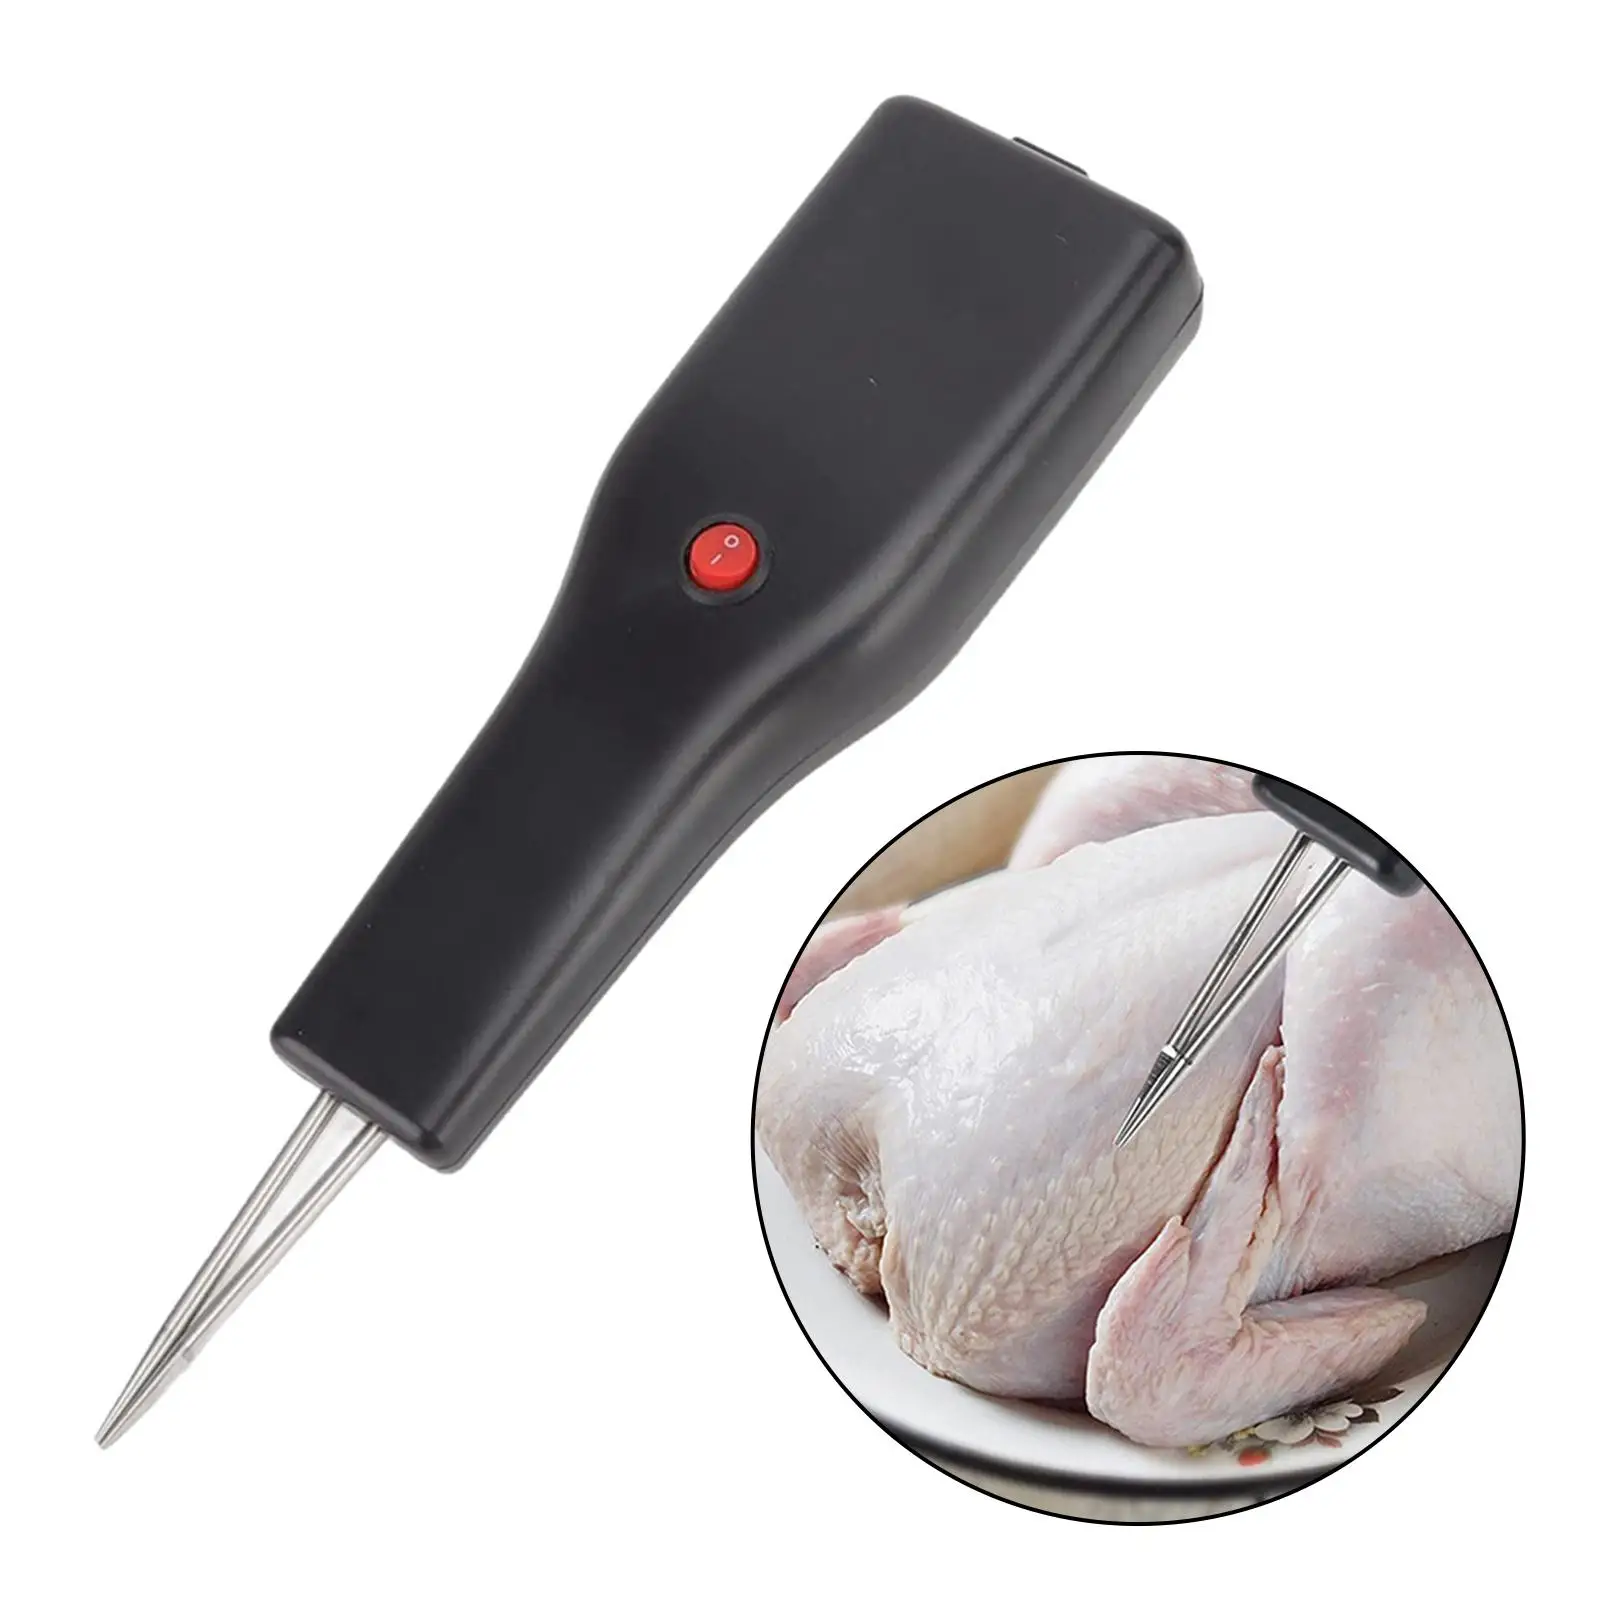 Handheld Electric Poultry Plucker Short Hair Removal Machine Feather Plucking for Outdoor Home Kitchen BBQ Traveling